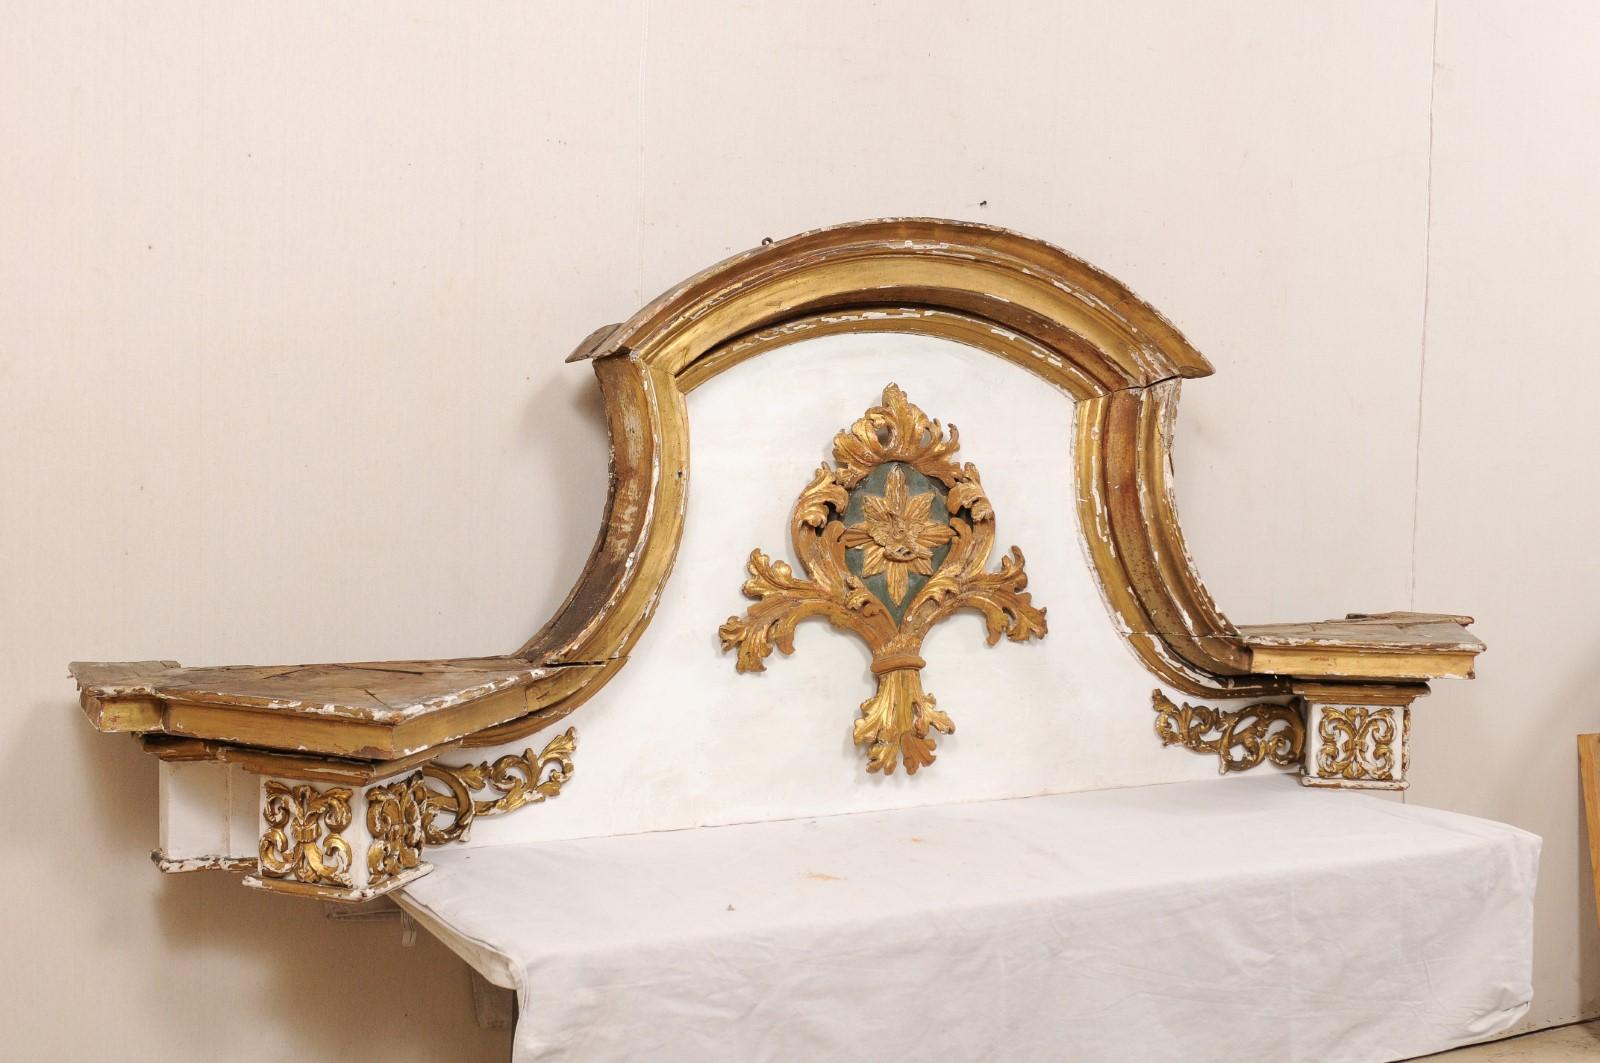 Impressive 18th Century Italian Carved, Gilded & Painted Wood Pediment Fragment In Good Condition For Sale In Atlanta, GA